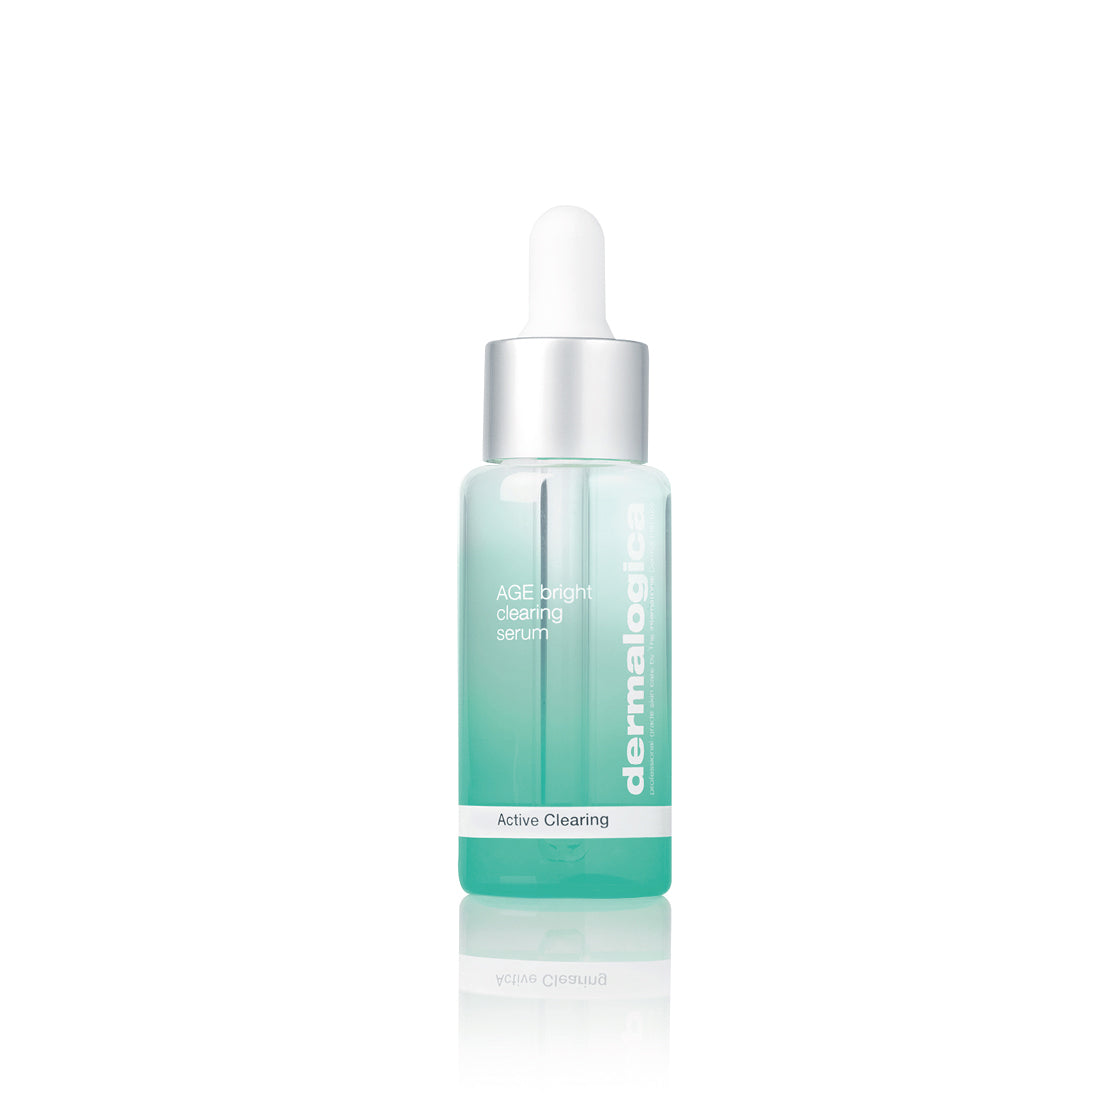 Age Bright Clearing Serum.